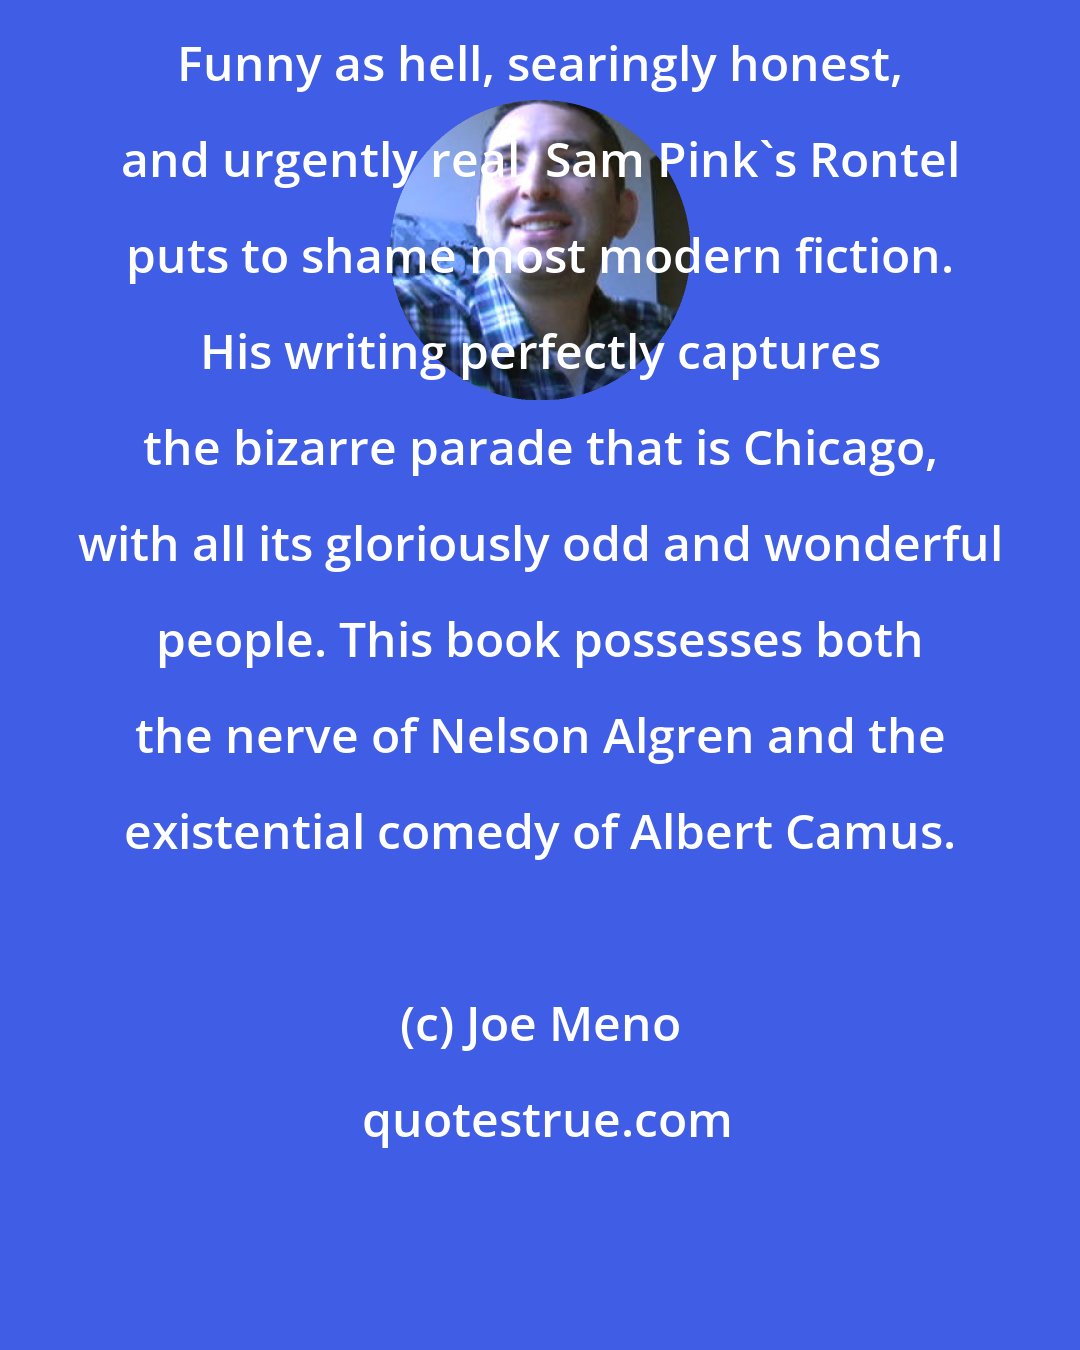 Joe Meno: Funny as hell, searingly honest, and urgently real, Sam Pink's Rontel puts to shame most modern fiction. His writing perfectly captures the bizarre parade that is Chicago, with all its gloriously odd and wonderful people. This book possesses both the nerve of Nelson Algren and the existential comedy of Albert Camus.